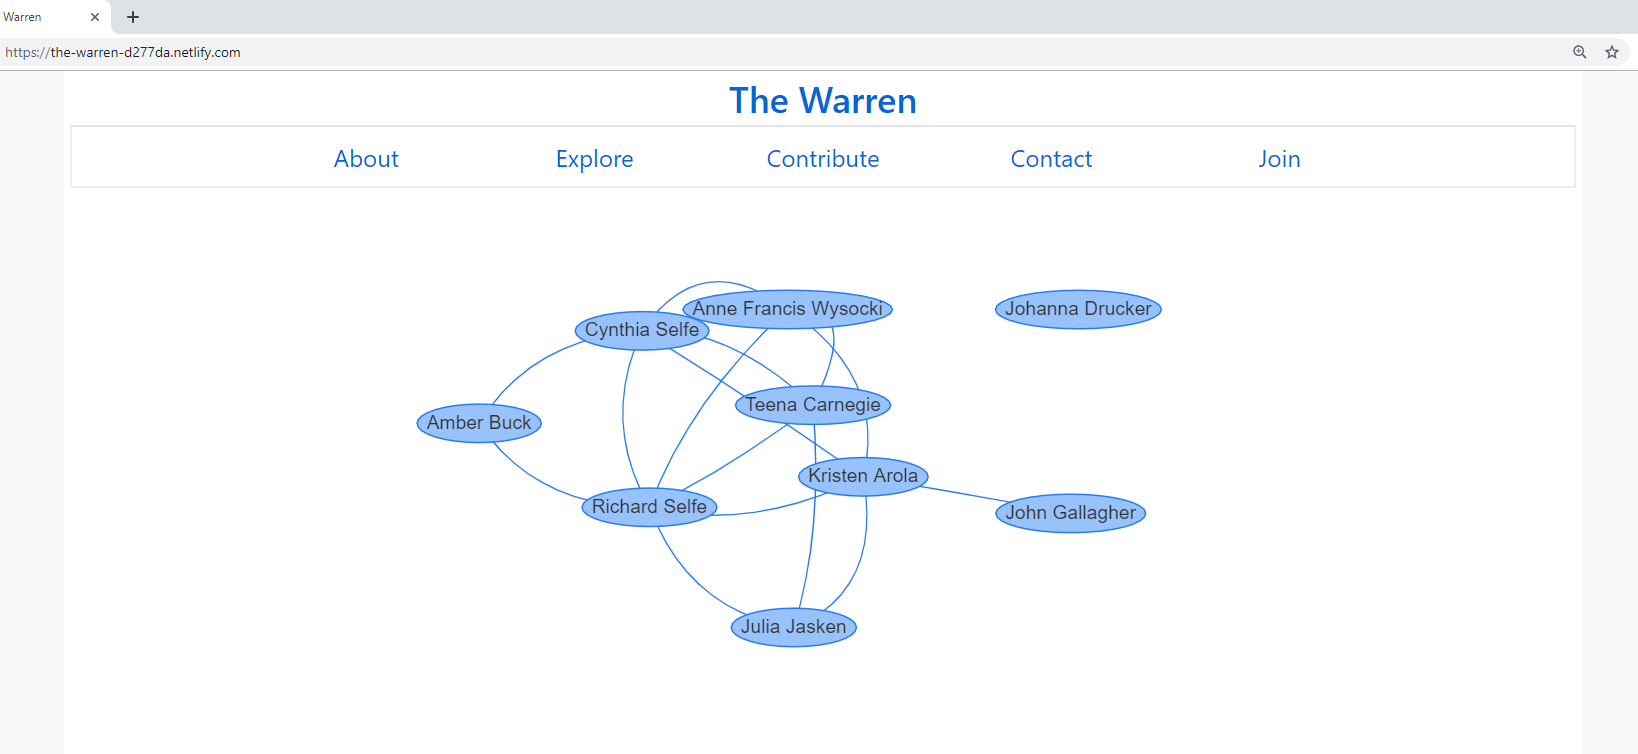 The Warren’s homepage, featuring the prototype relationship graph. The graph currently contains the names of authors from one week of readings in Digital Rhetoric and Literacy, as a model for future connections.